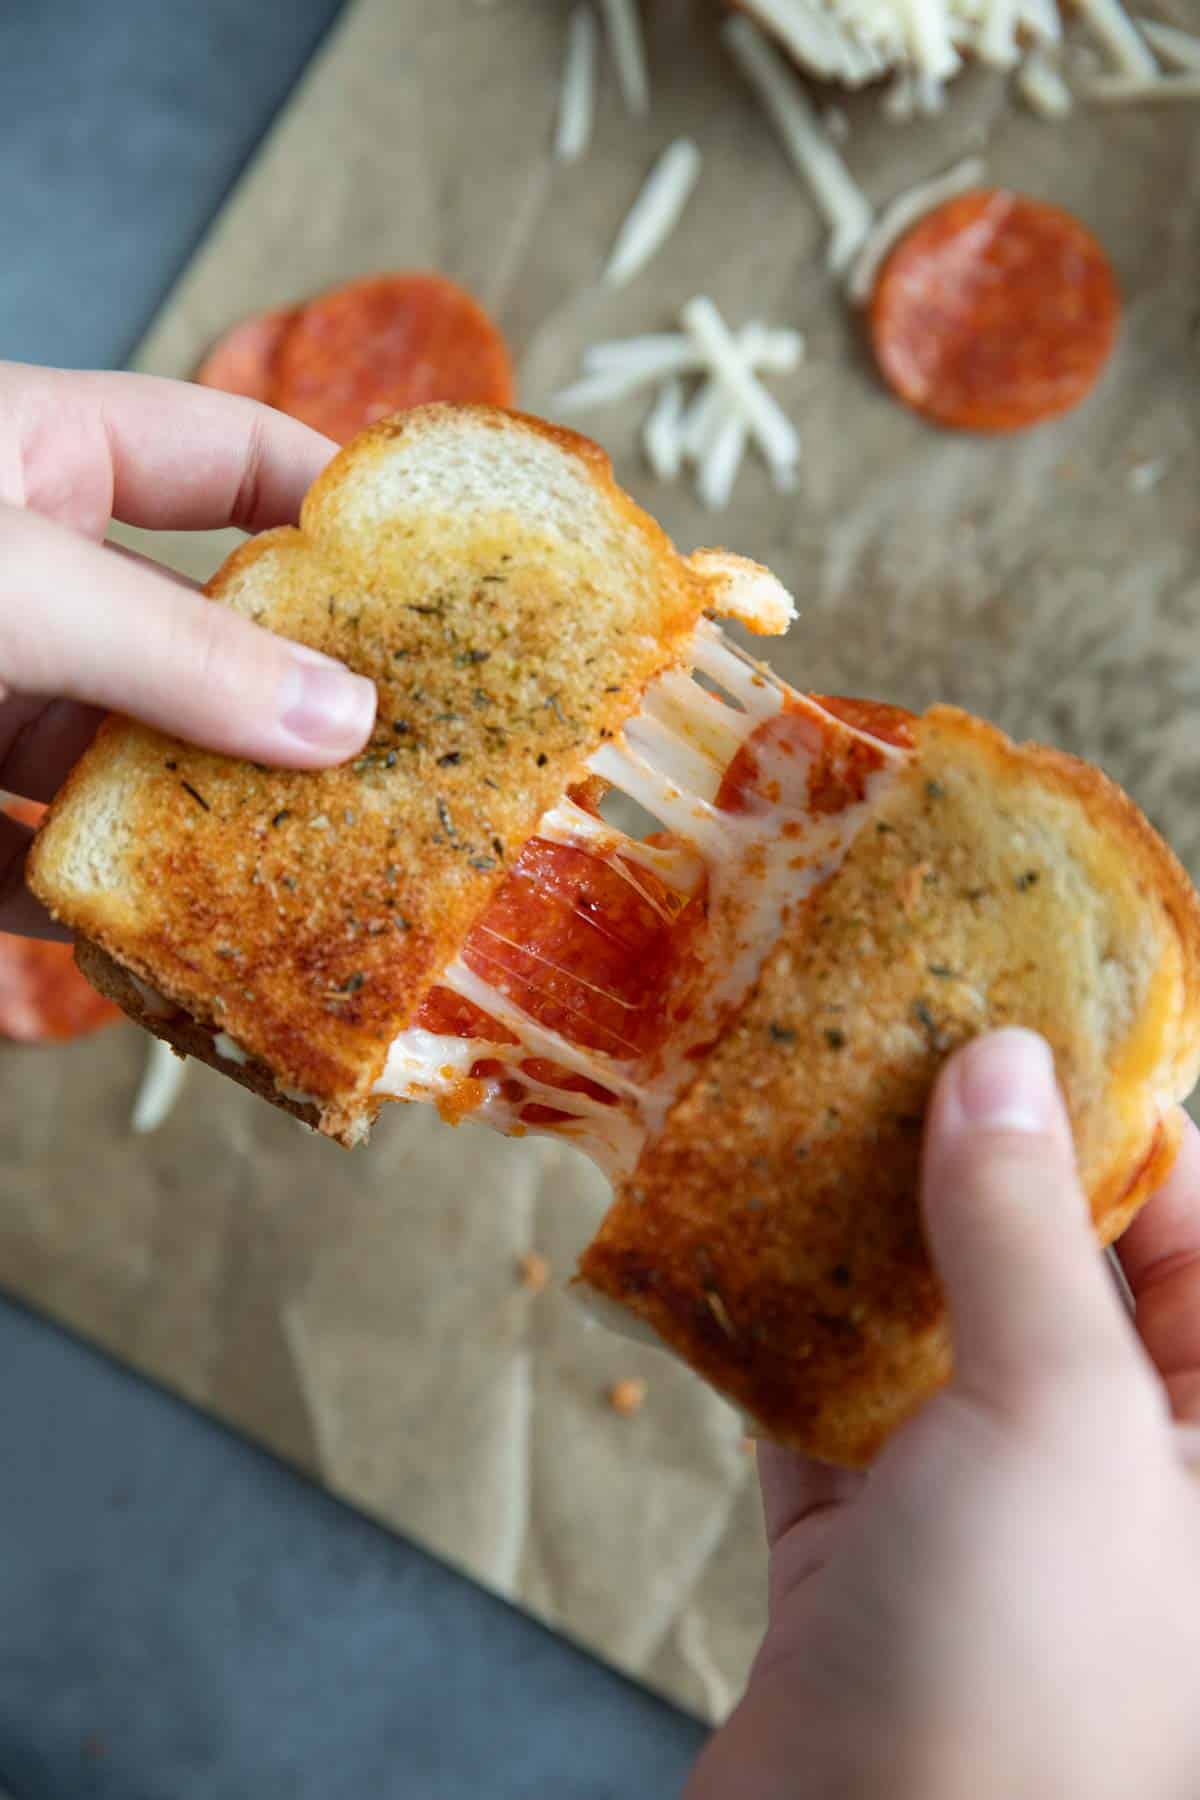 Hands pulling a pizza grilled cheese apart, showing the cheese pull.